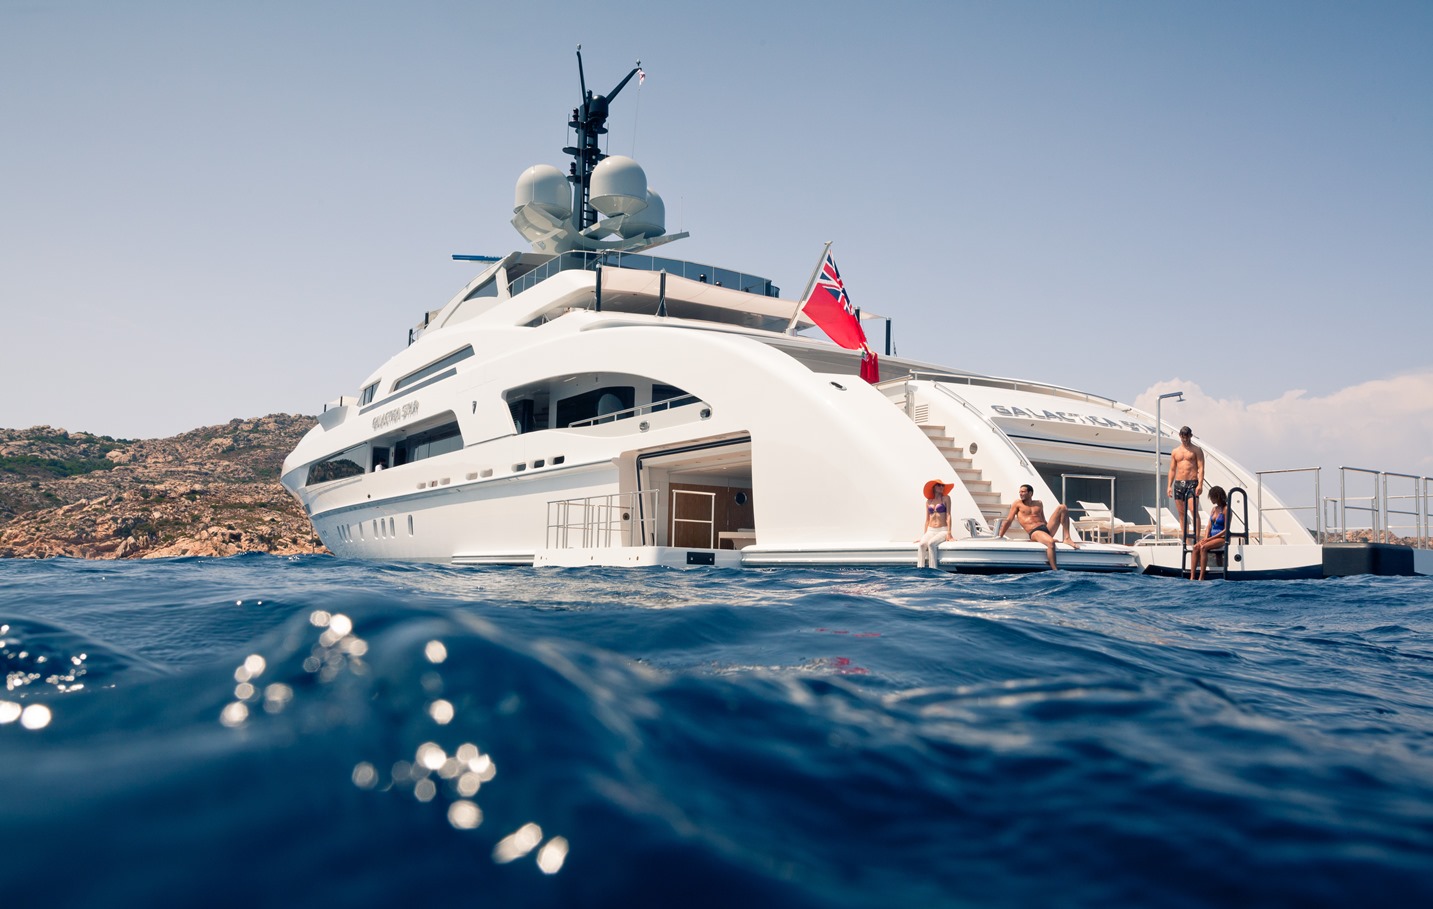 Yacht Charter Prices and Advantages of Motor Yacht Charter